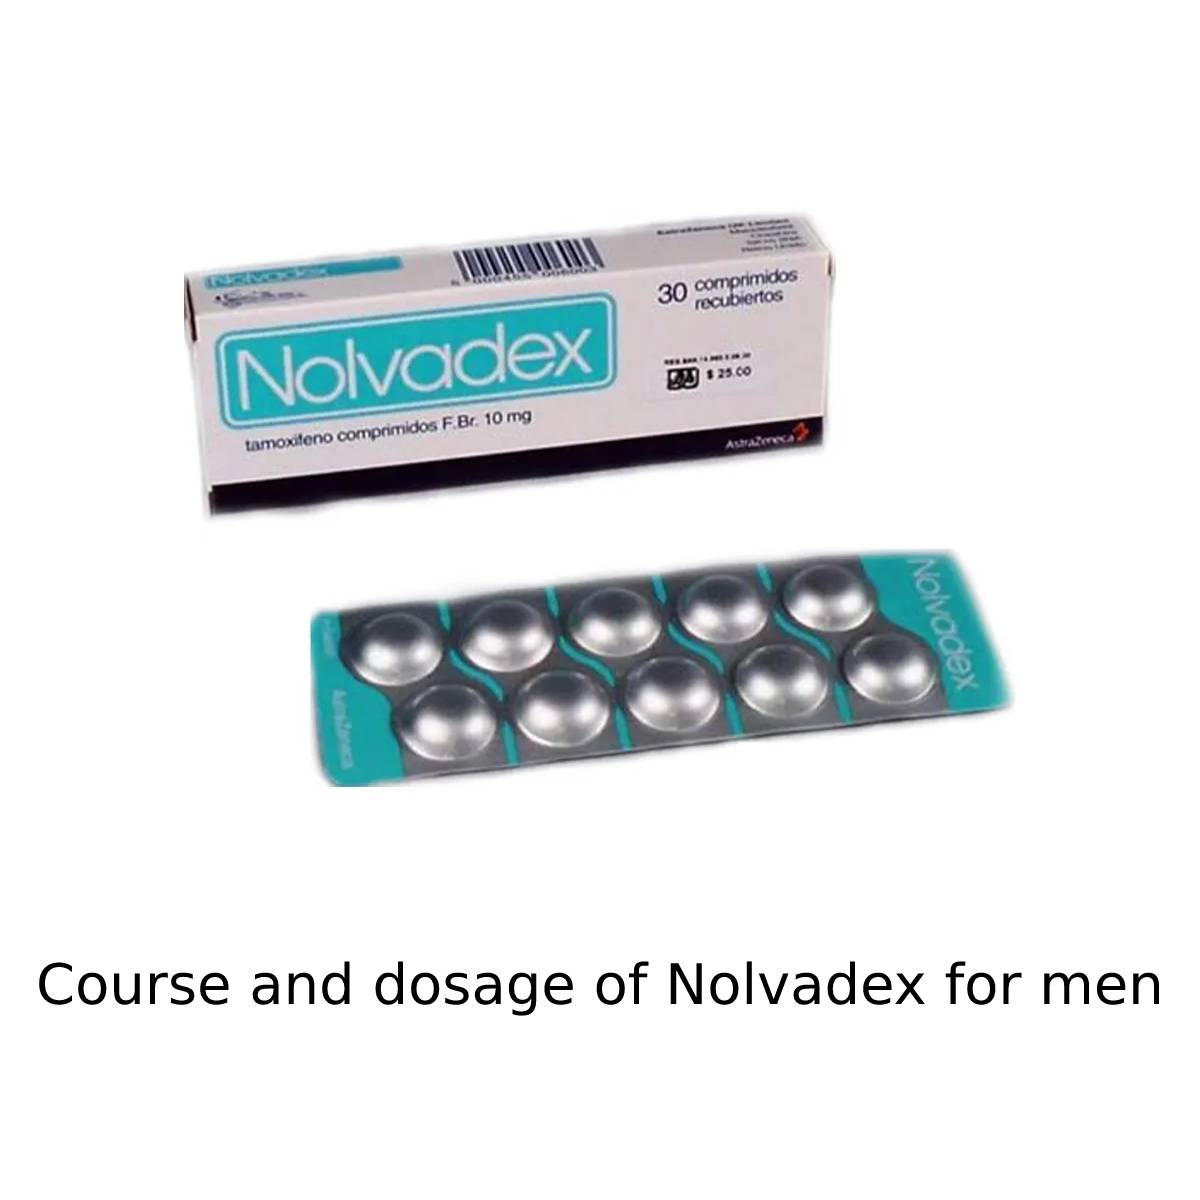 Course and dosage of Nolvadex for men